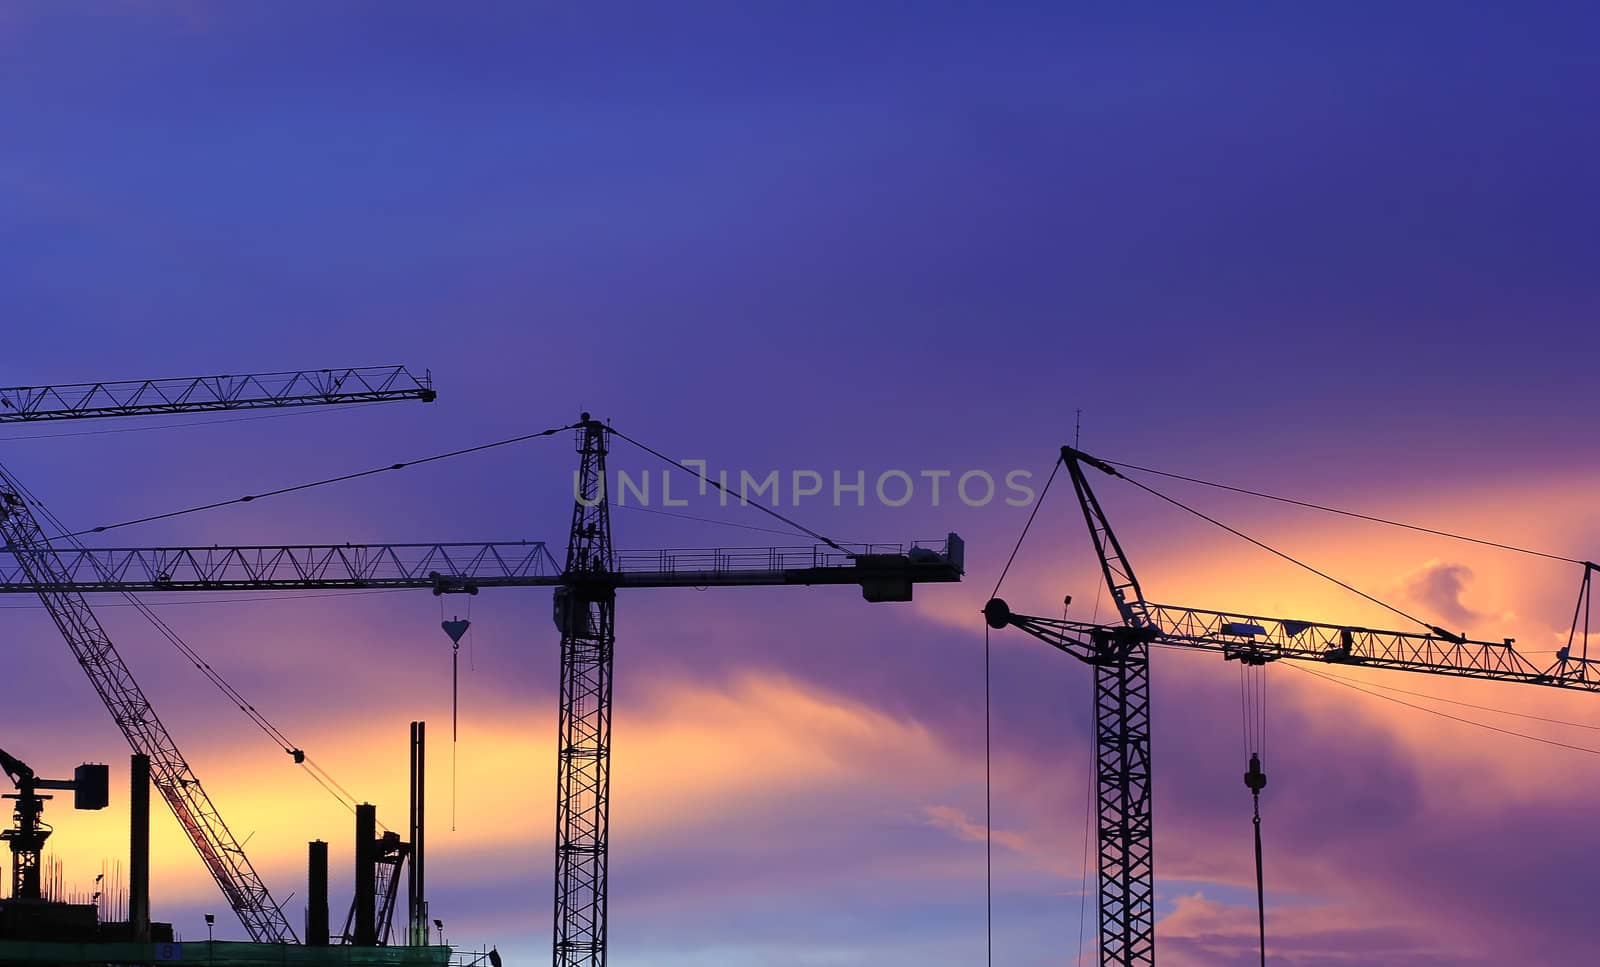 Construction work. Tower cranes are used to complete the task quickly.